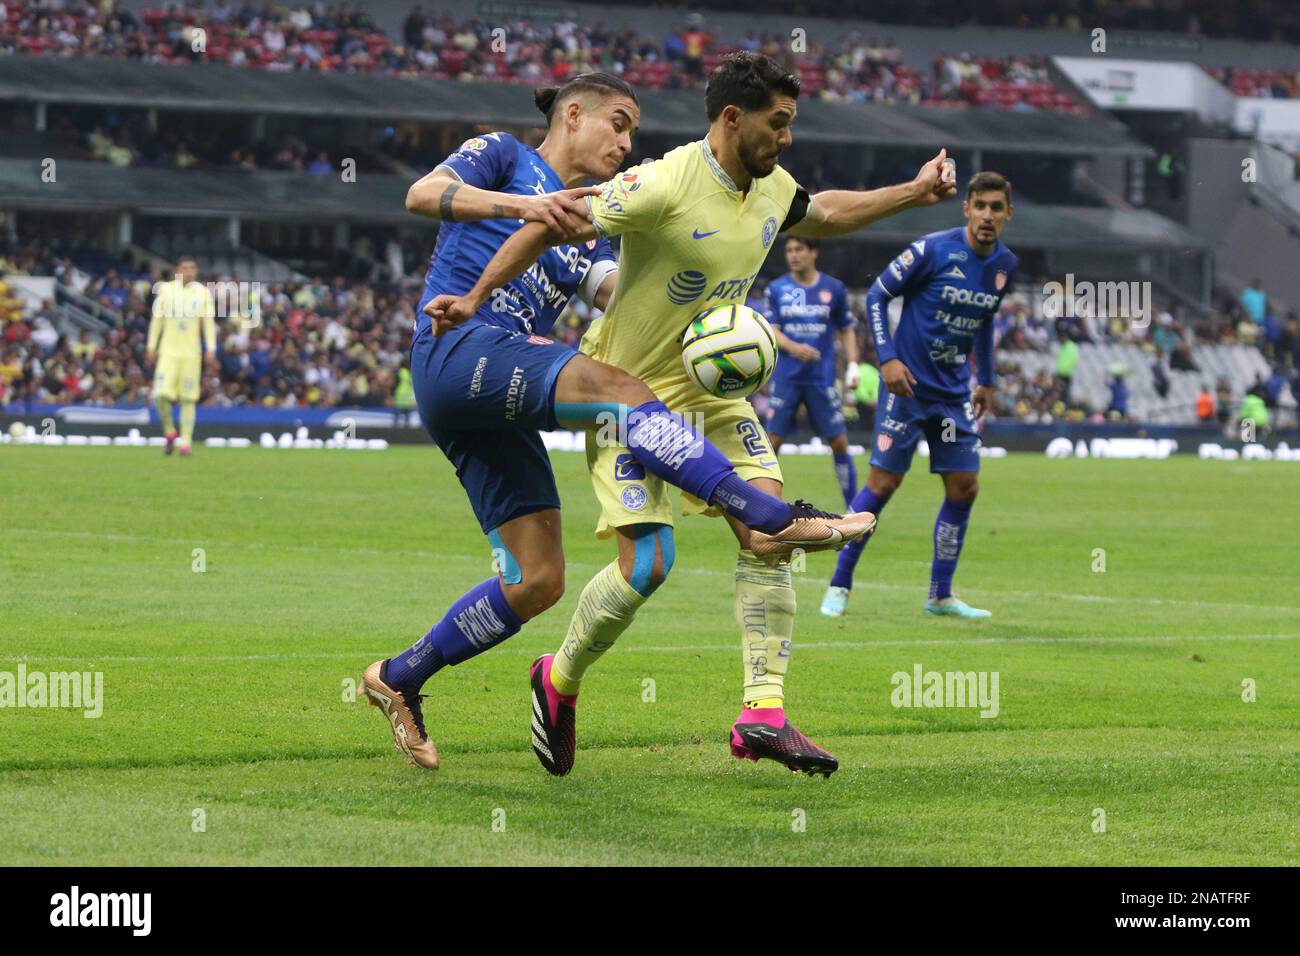 Mexico City, Mexico. 11th Feb, 2023. February 12, 2023 in Mexico City, Mexico: Henry Martín of Club América and Alexis Peña of Necaxa fight for the ball during the America vs Necaxa football match of the closing tournament 2023 at Azteca Stadium. on February 12, 2023 in Mexico City, Mexico. (Photo by Ismael Rosas/ Eyepix Group/Sipa USA) Credit: Sipa USA/Alamy Live News Stock Photo